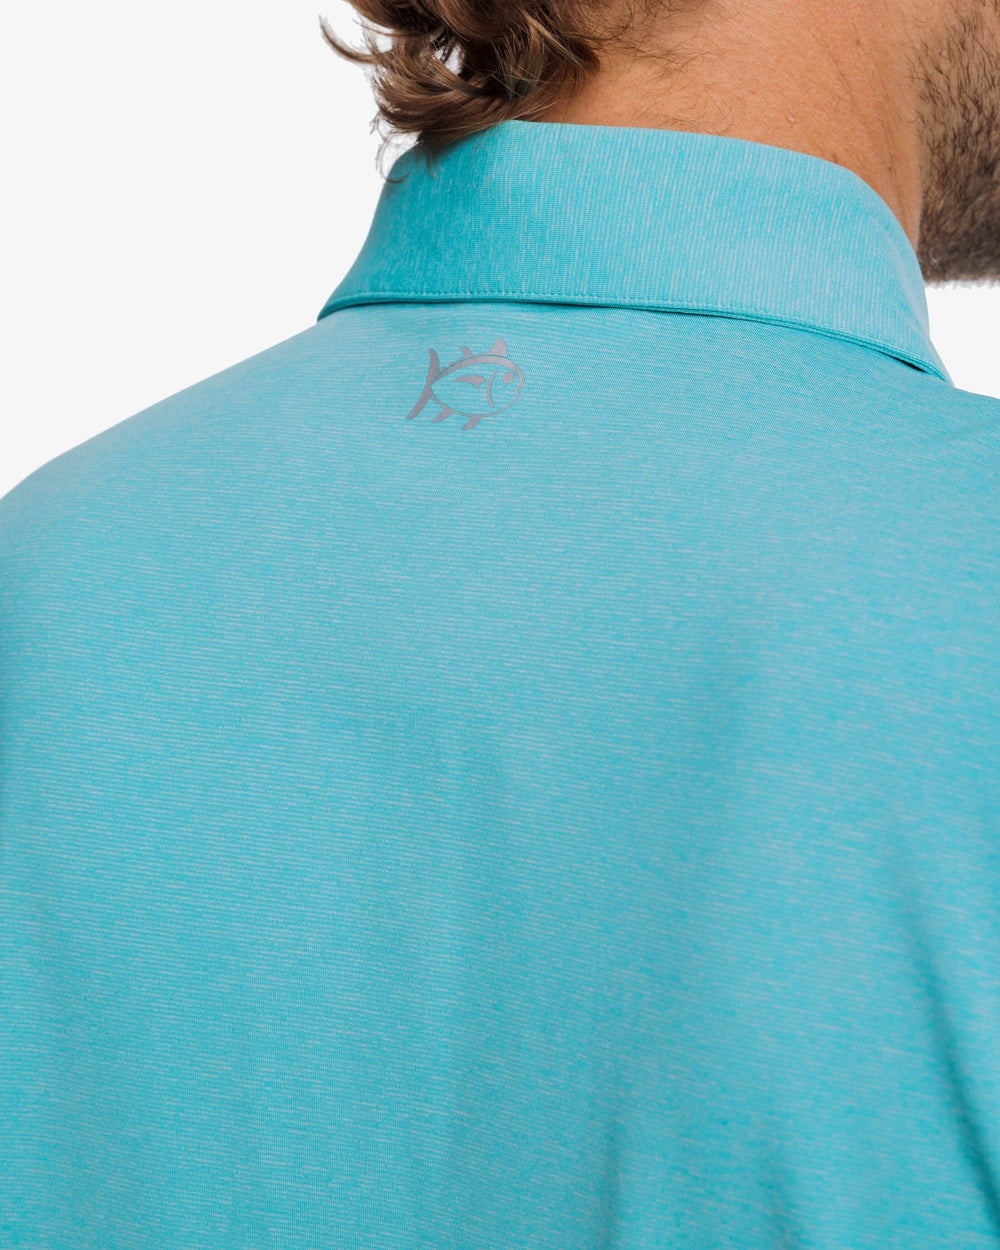 The yoke view of the brrr°®-eeze Heather Performance Polo Shirt by Southern Tide - Heather Tidal Wave